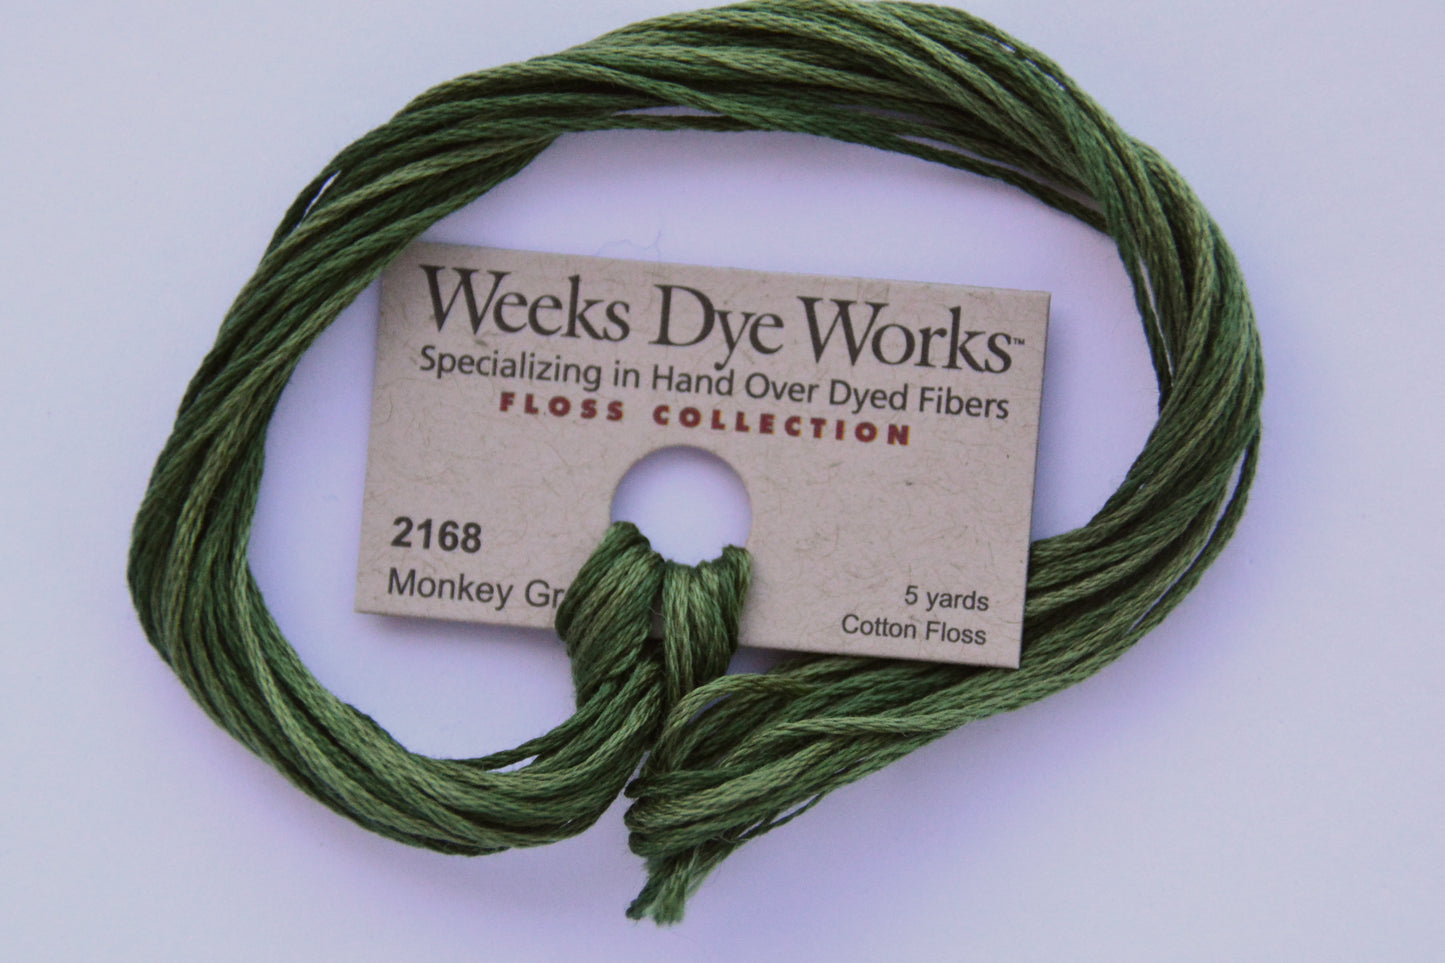 Monkey Grass 2168 Weeks Dye Works 6-Strand Hand-Dyed Embroidery Floss